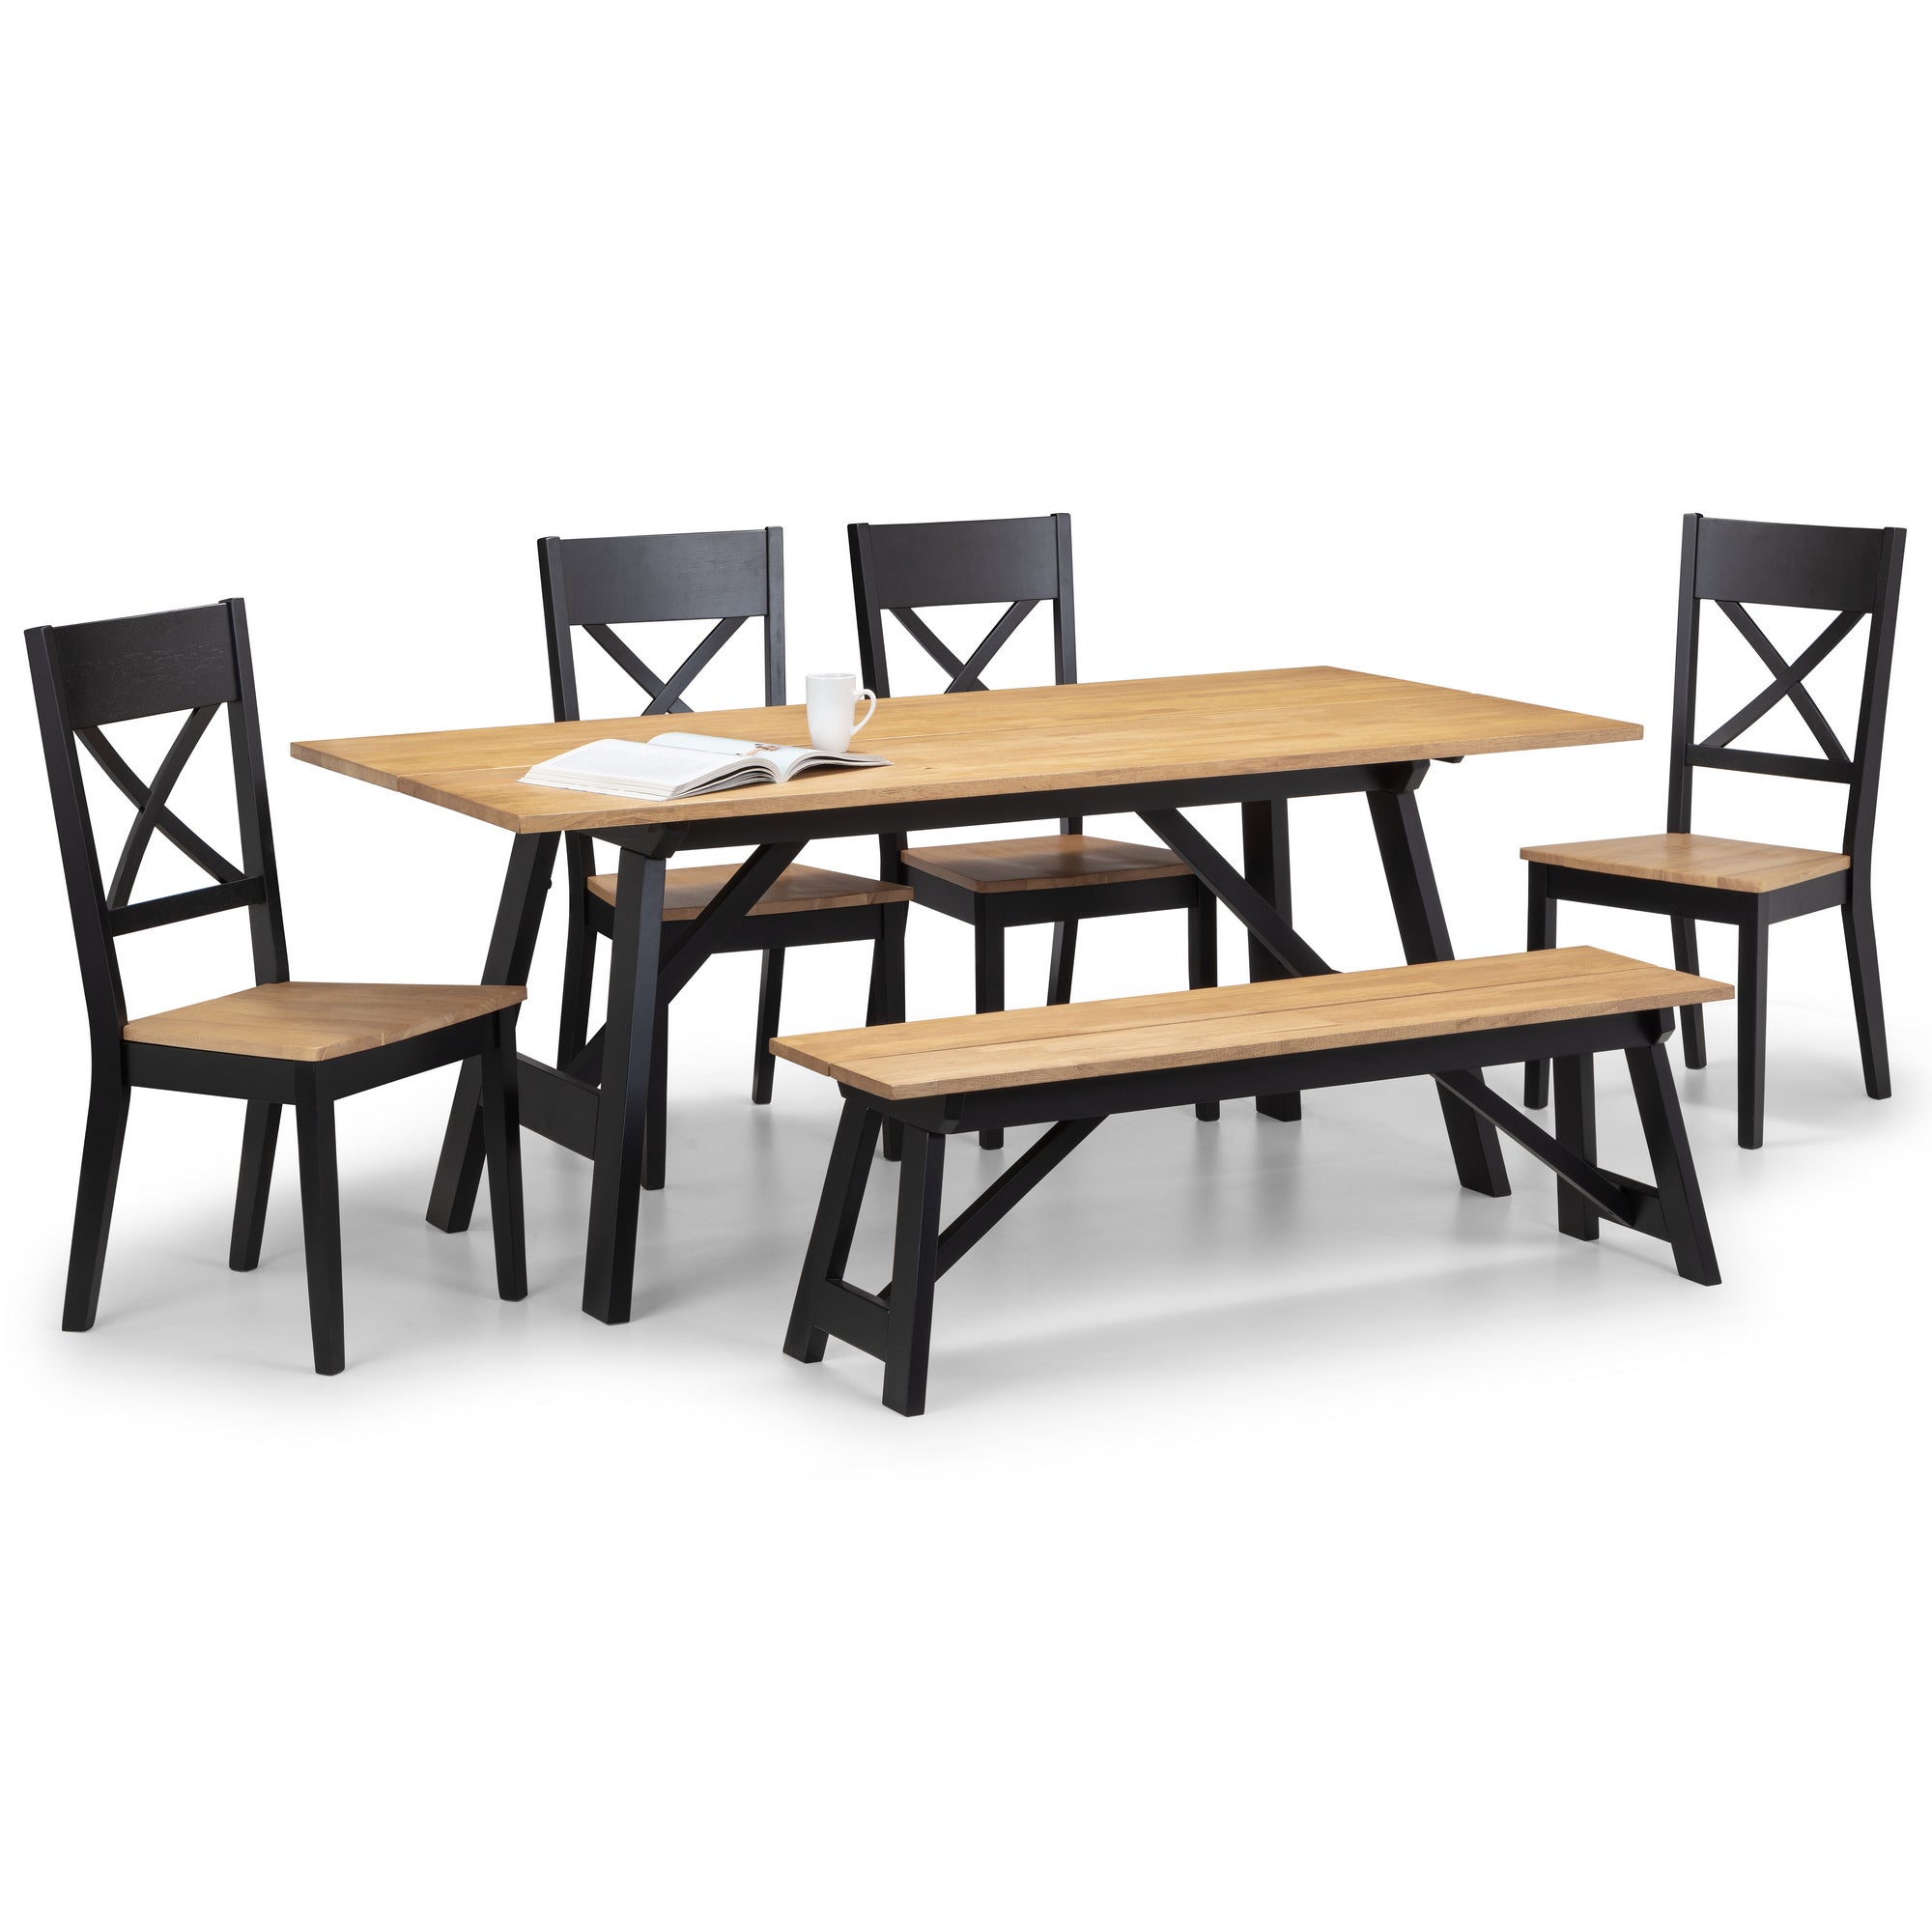 Hockley Rectangular Dining Table With 4 Chairs And Bench Black Black